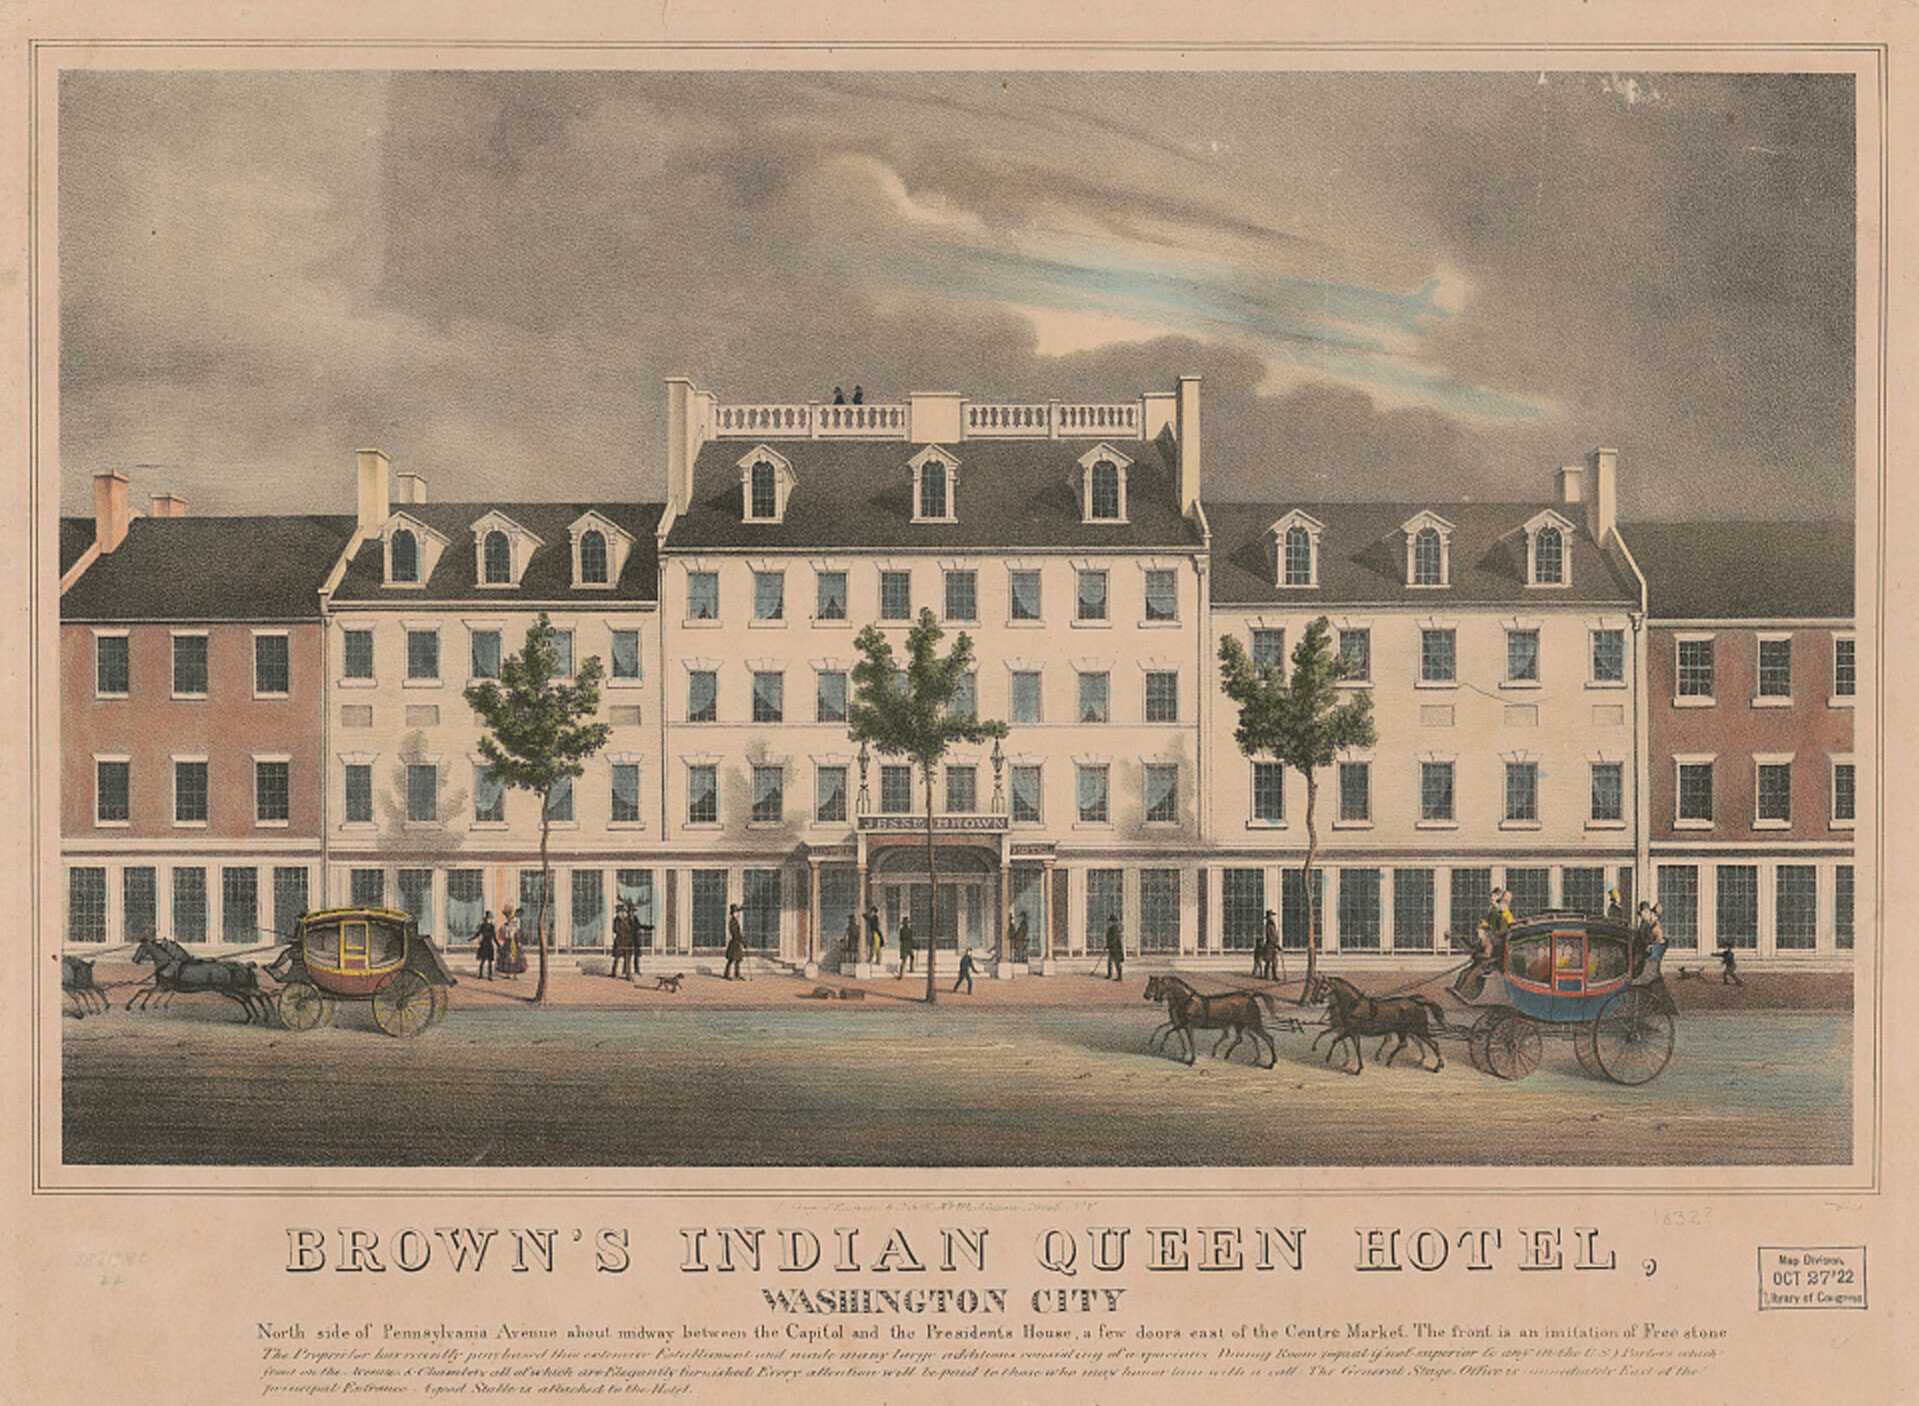 Illustration of Brown’s Indian Queen Hotel